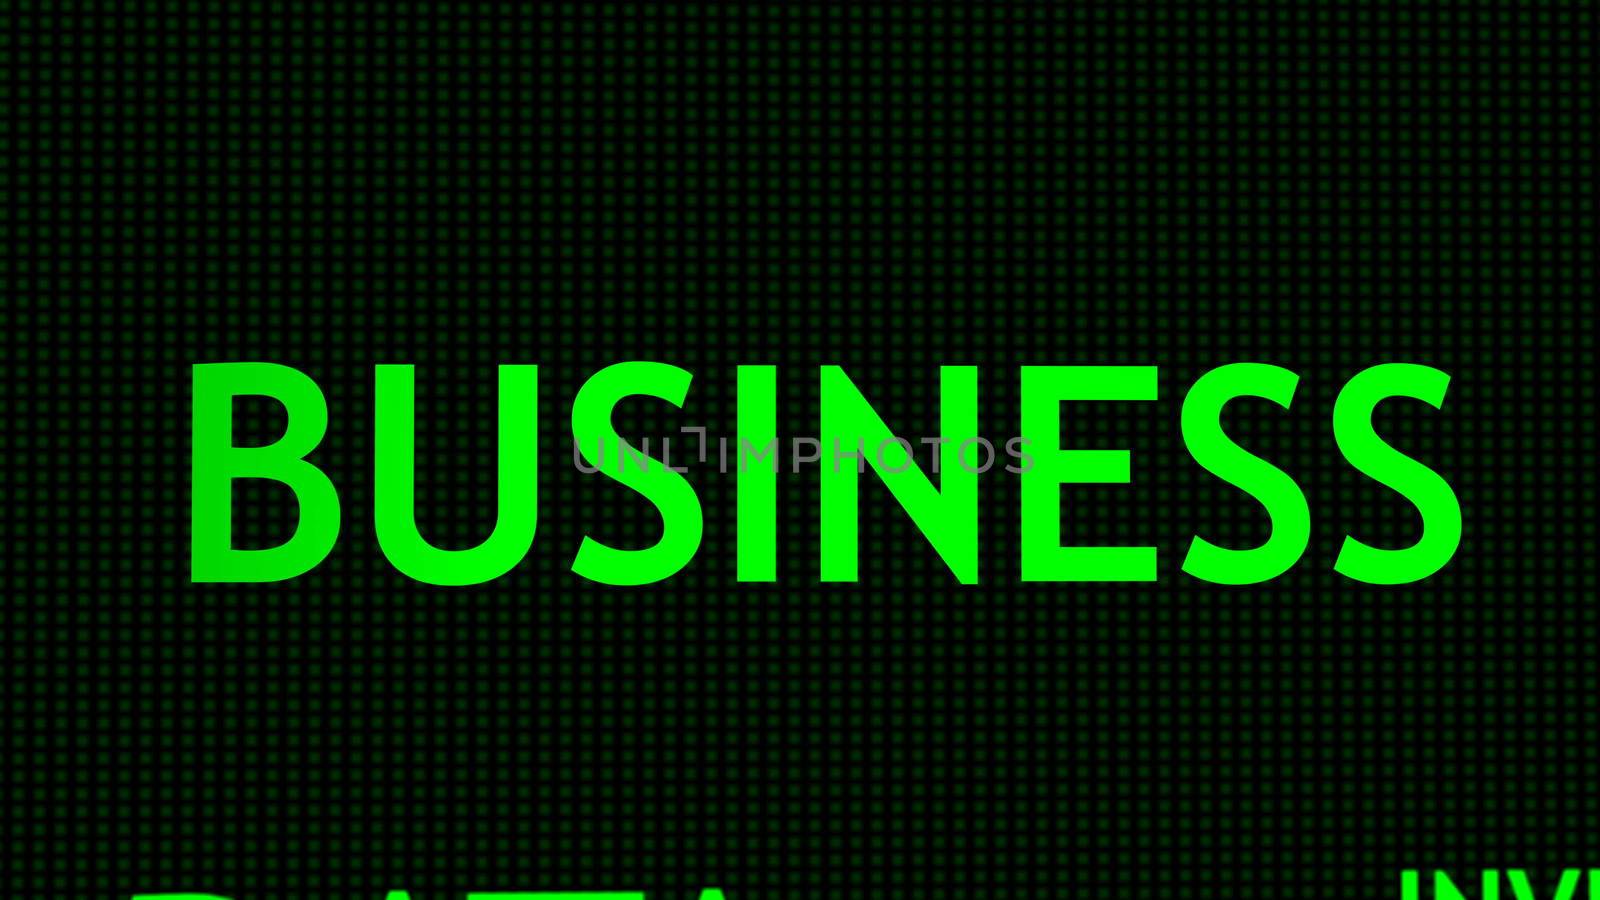 Business text animation. Digital illustration by nolimit046